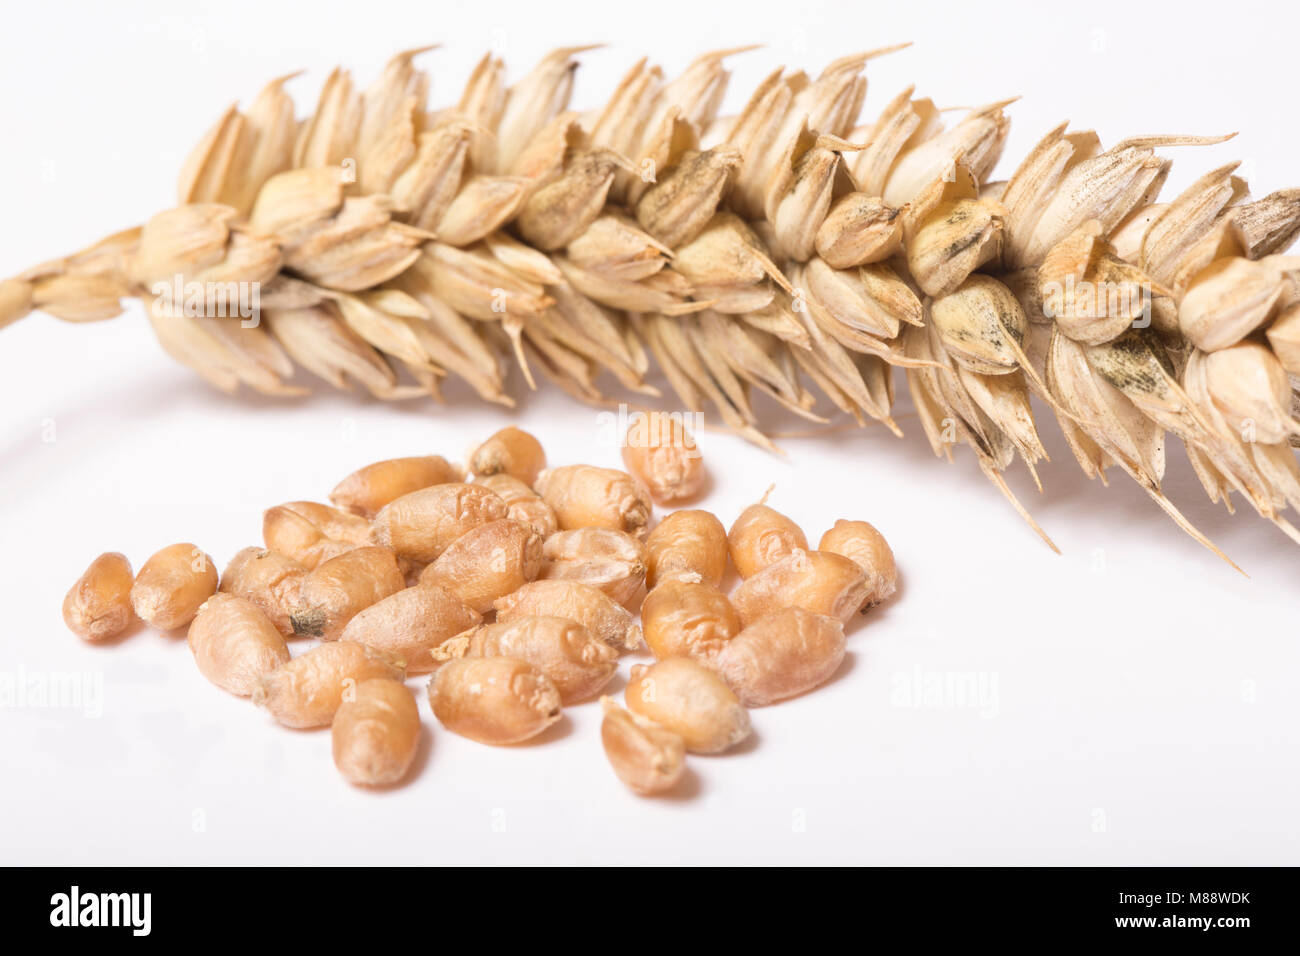 Studio picture of wheat, Dorset England UK GB. Photographed on a white background. Stock Photo